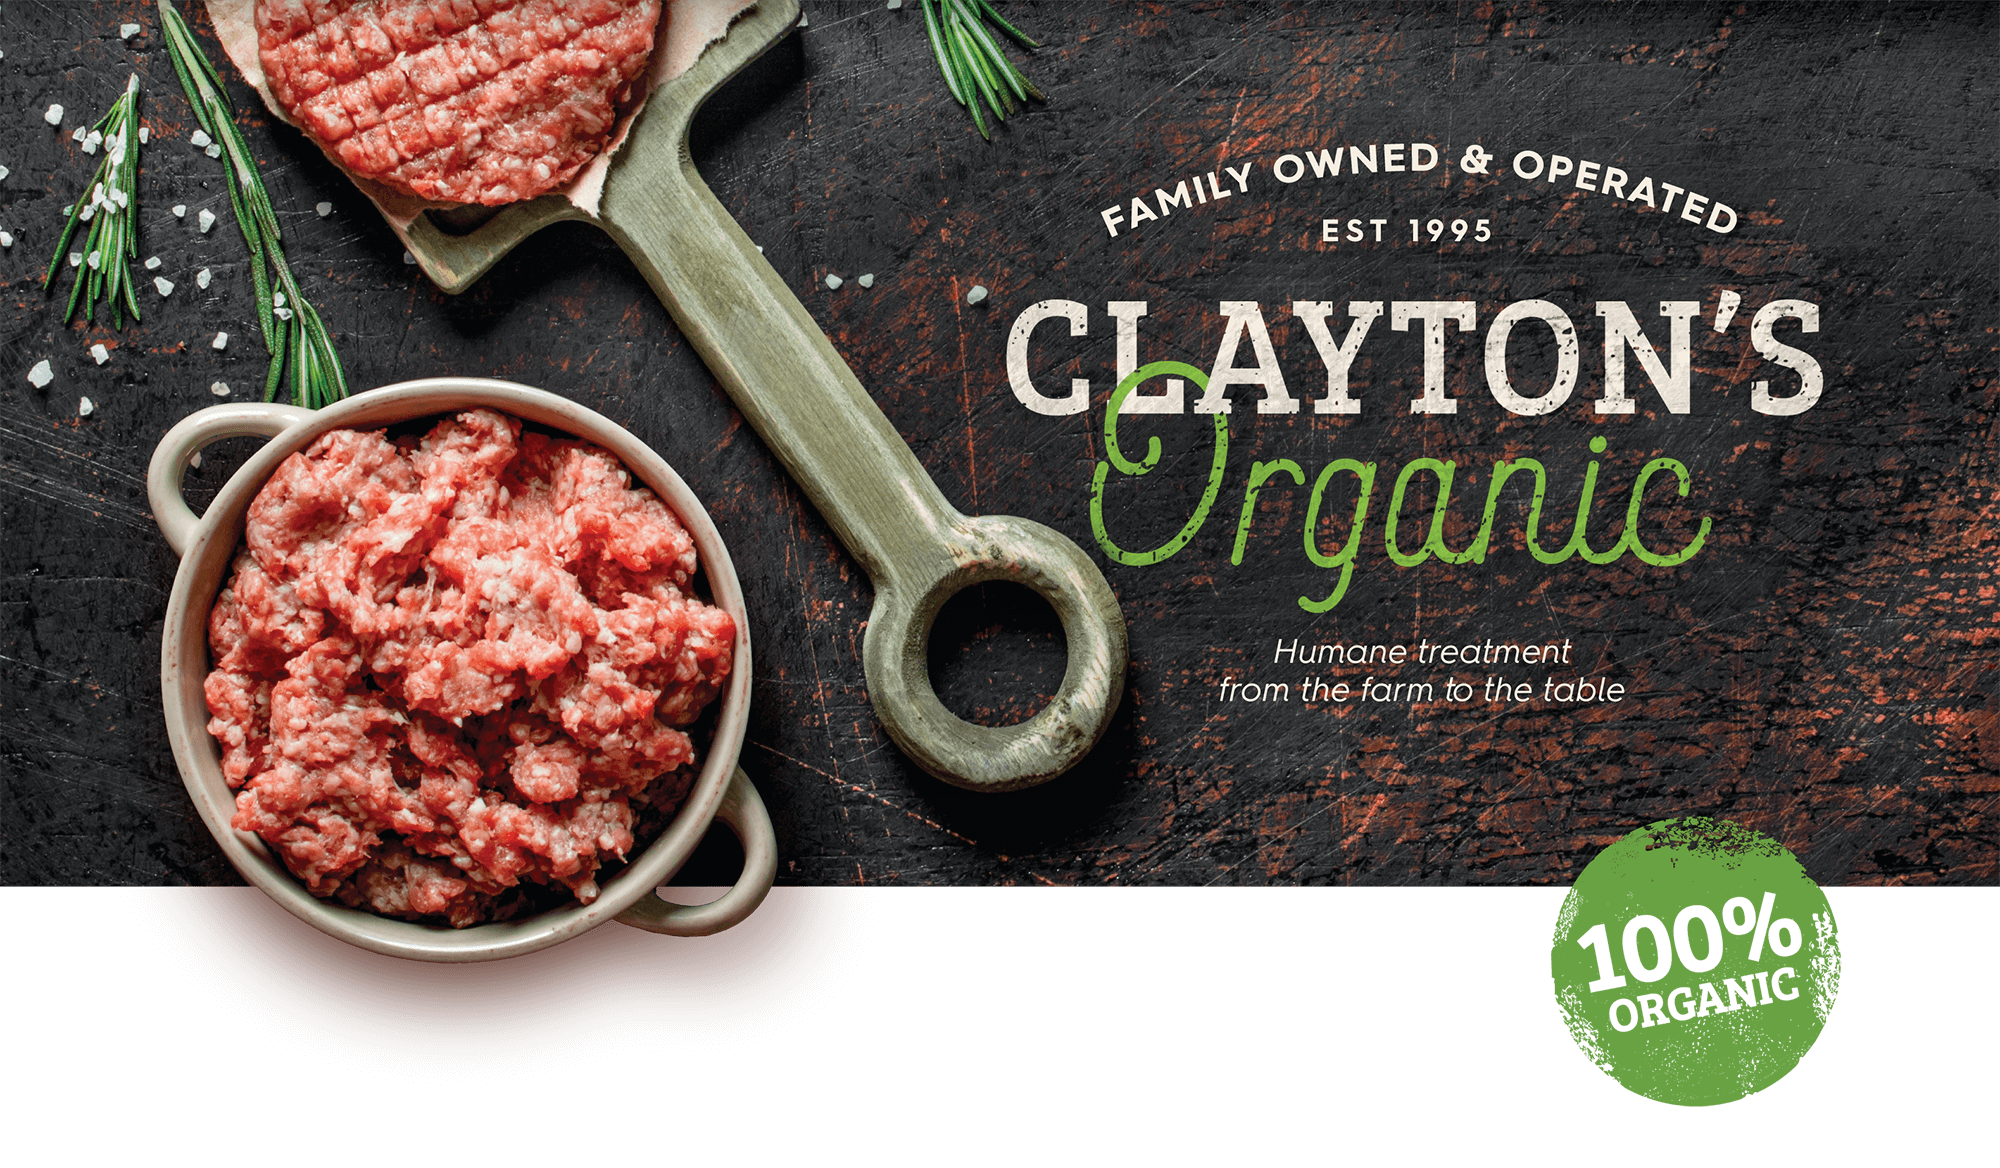 Clayton's Organic Humane treatment from the farm to the table